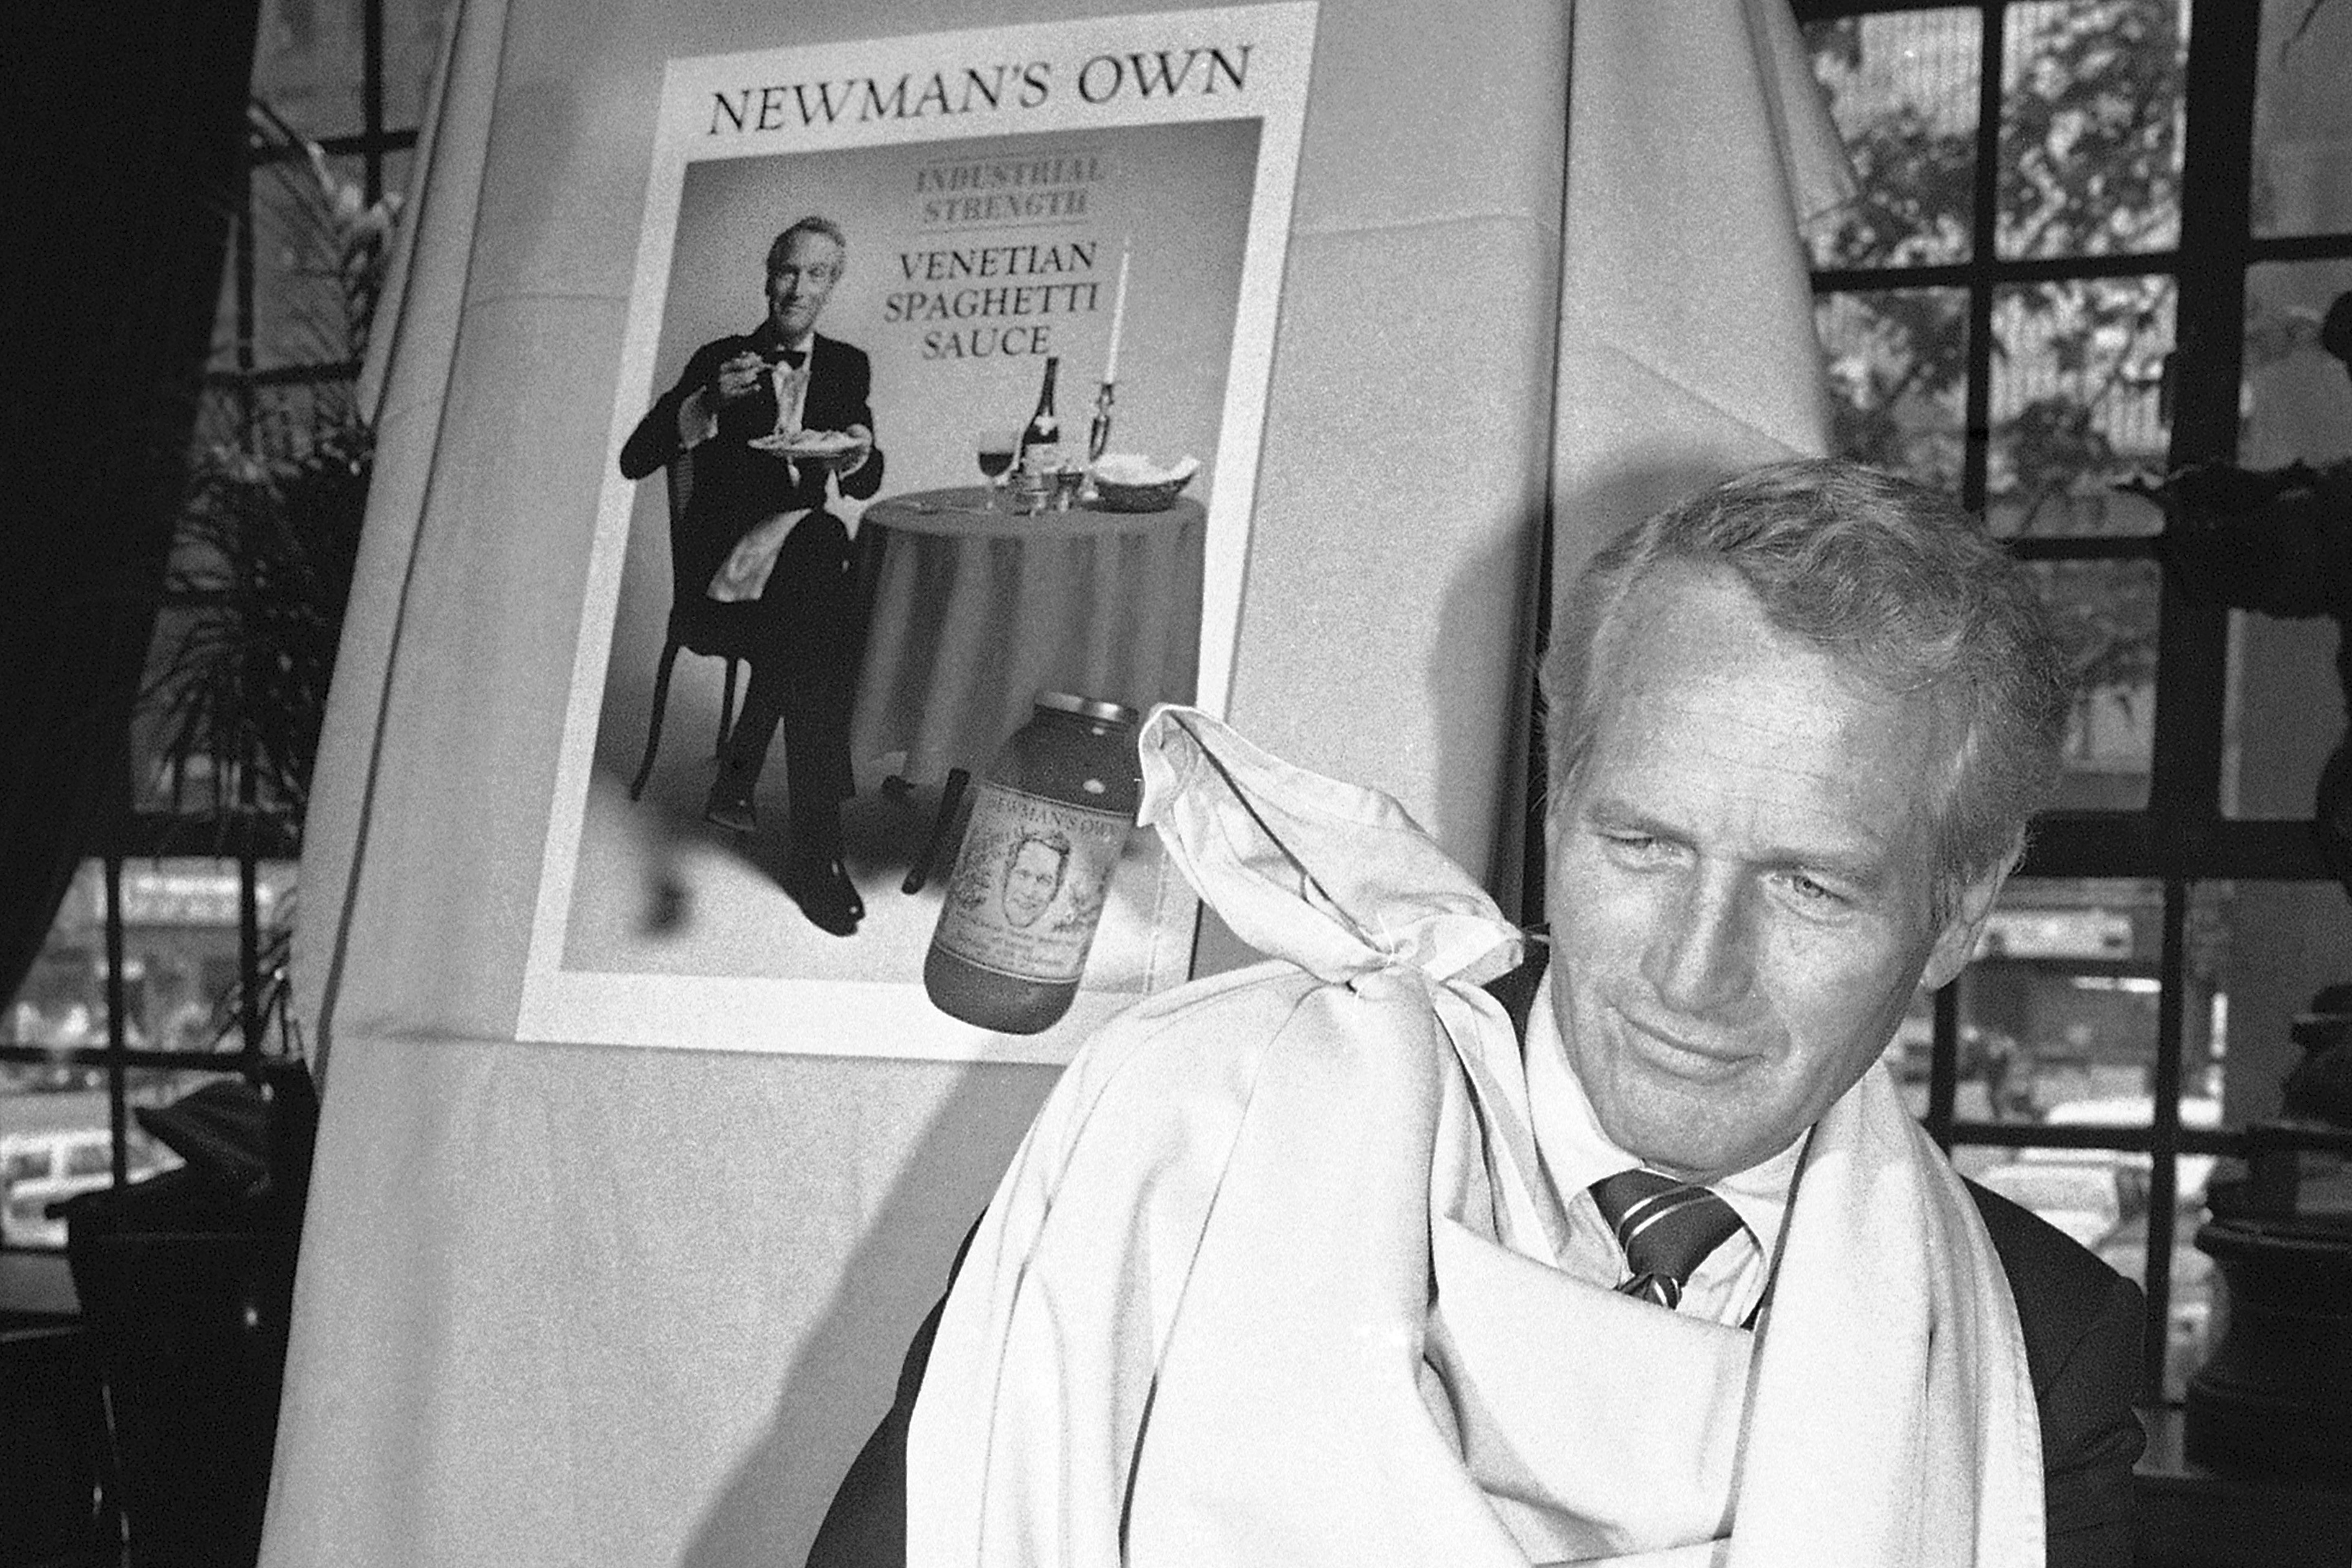 In the memoir, Newman talks candidly about his traumatic upbringing, his lack of success with women, his films... and his love story with Joanne Woodward